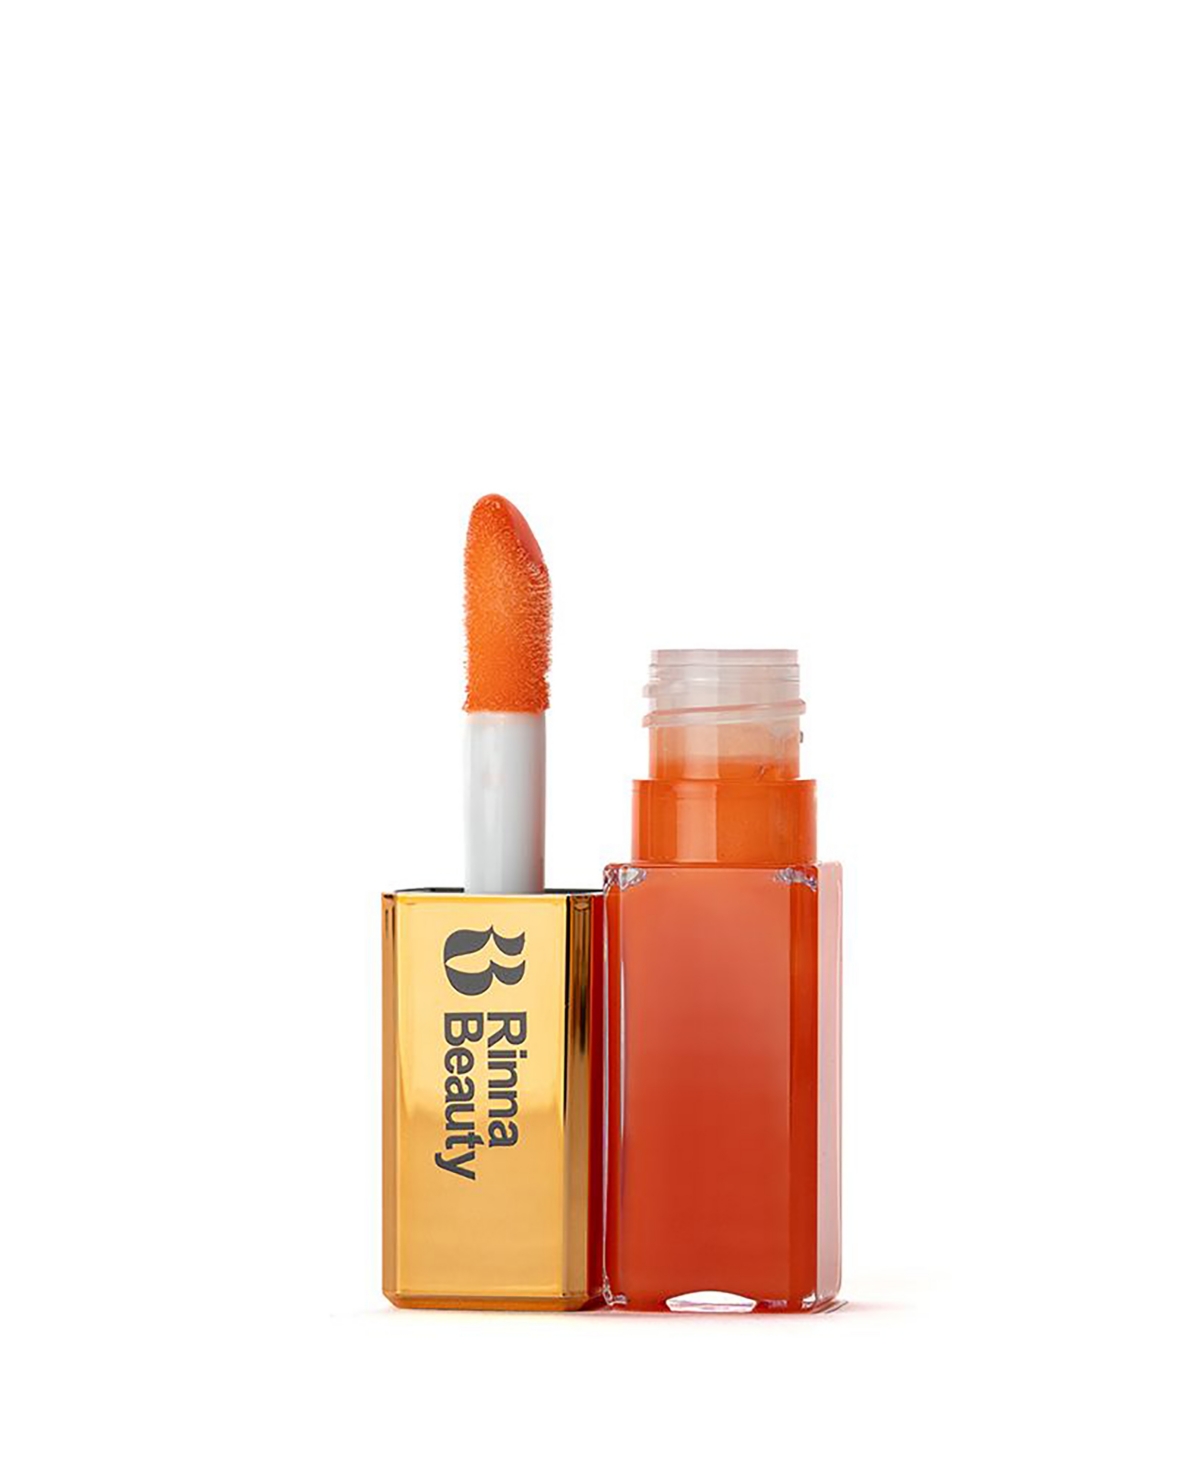 Rinna Beauty Larger Than Life Lip Plumping Oil, 0.30 Oz. In Sunset (coral)